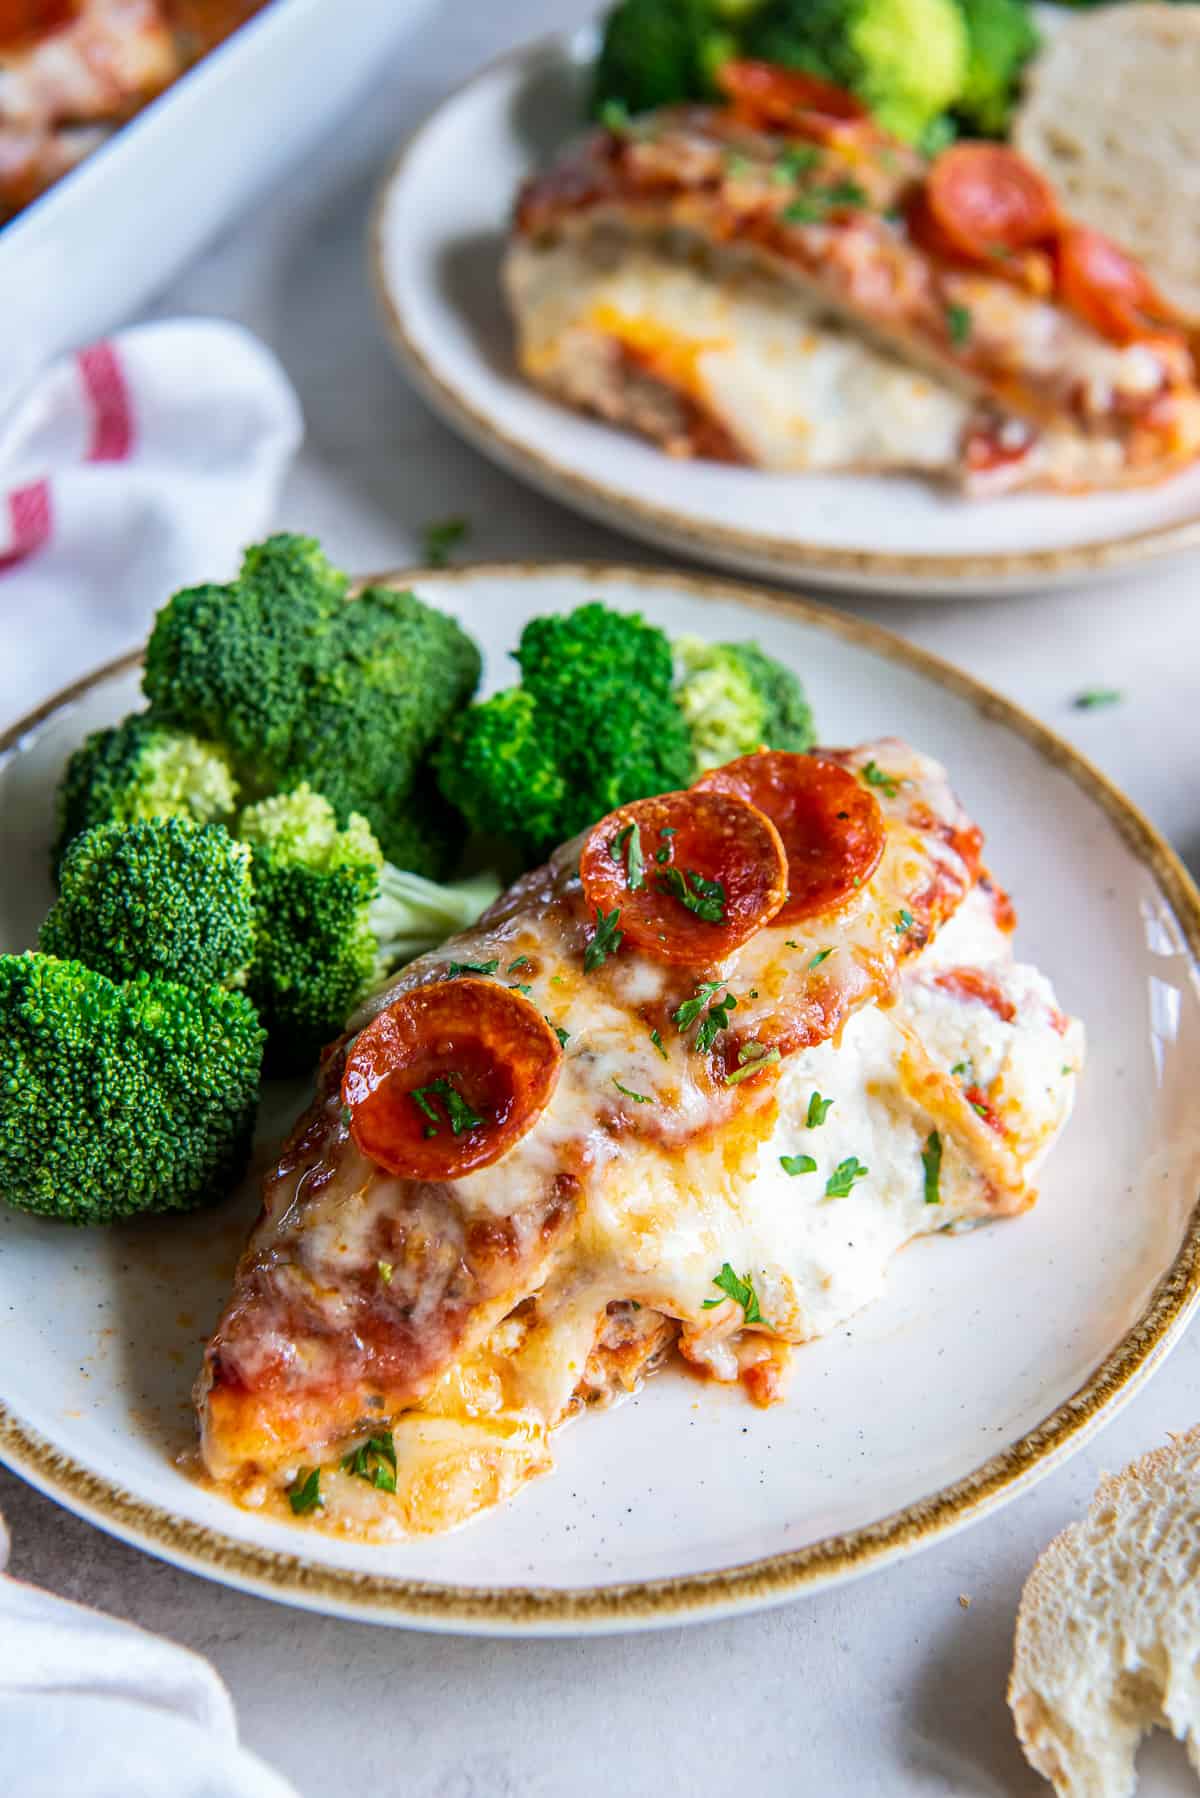 A slice of Pizza Chicken on a white plate with broccoli.